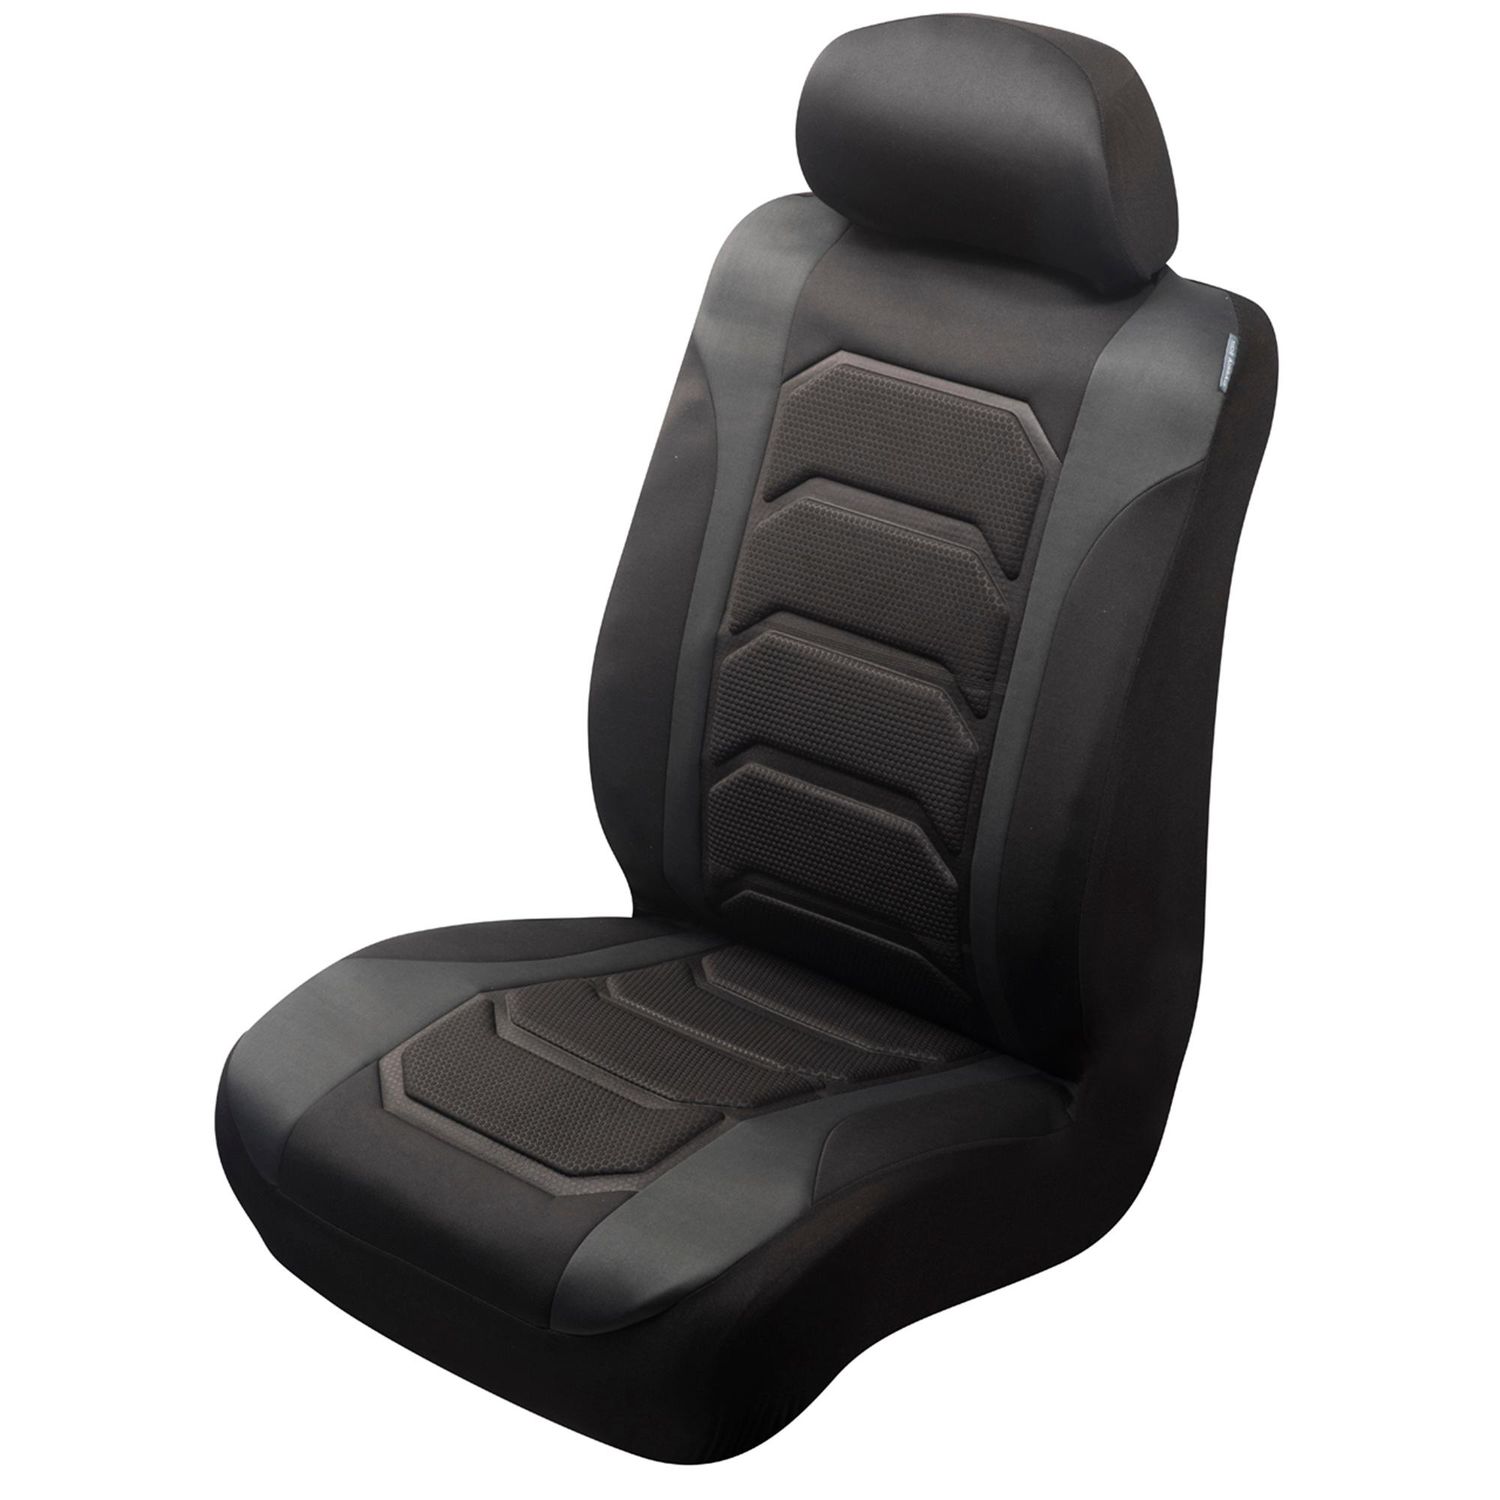 Type S Rugged wetsuit seat cover